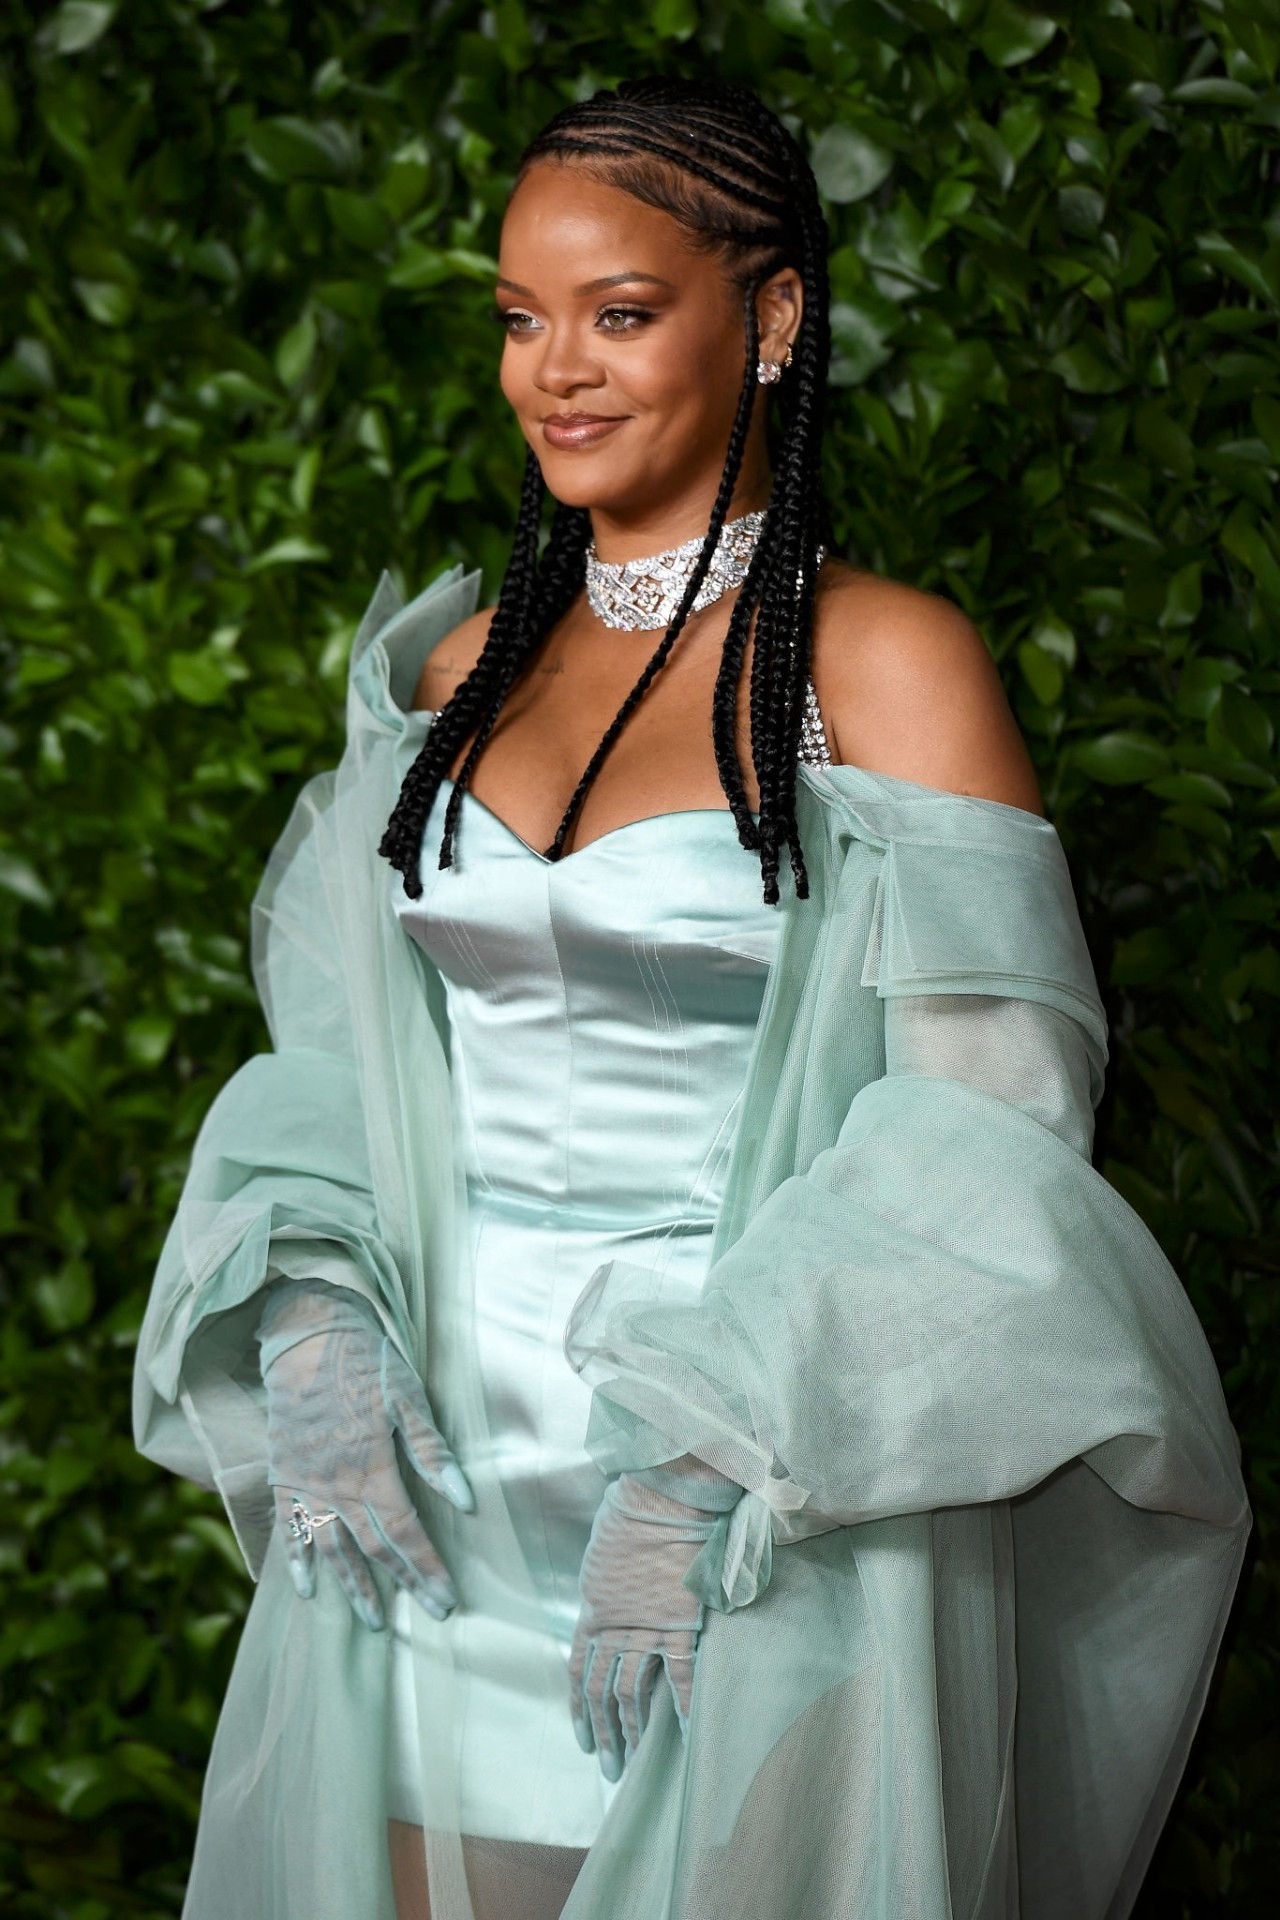 Rihanna Big Boobs In Cleavage At Fashion Awards In London Hot Celebs Home